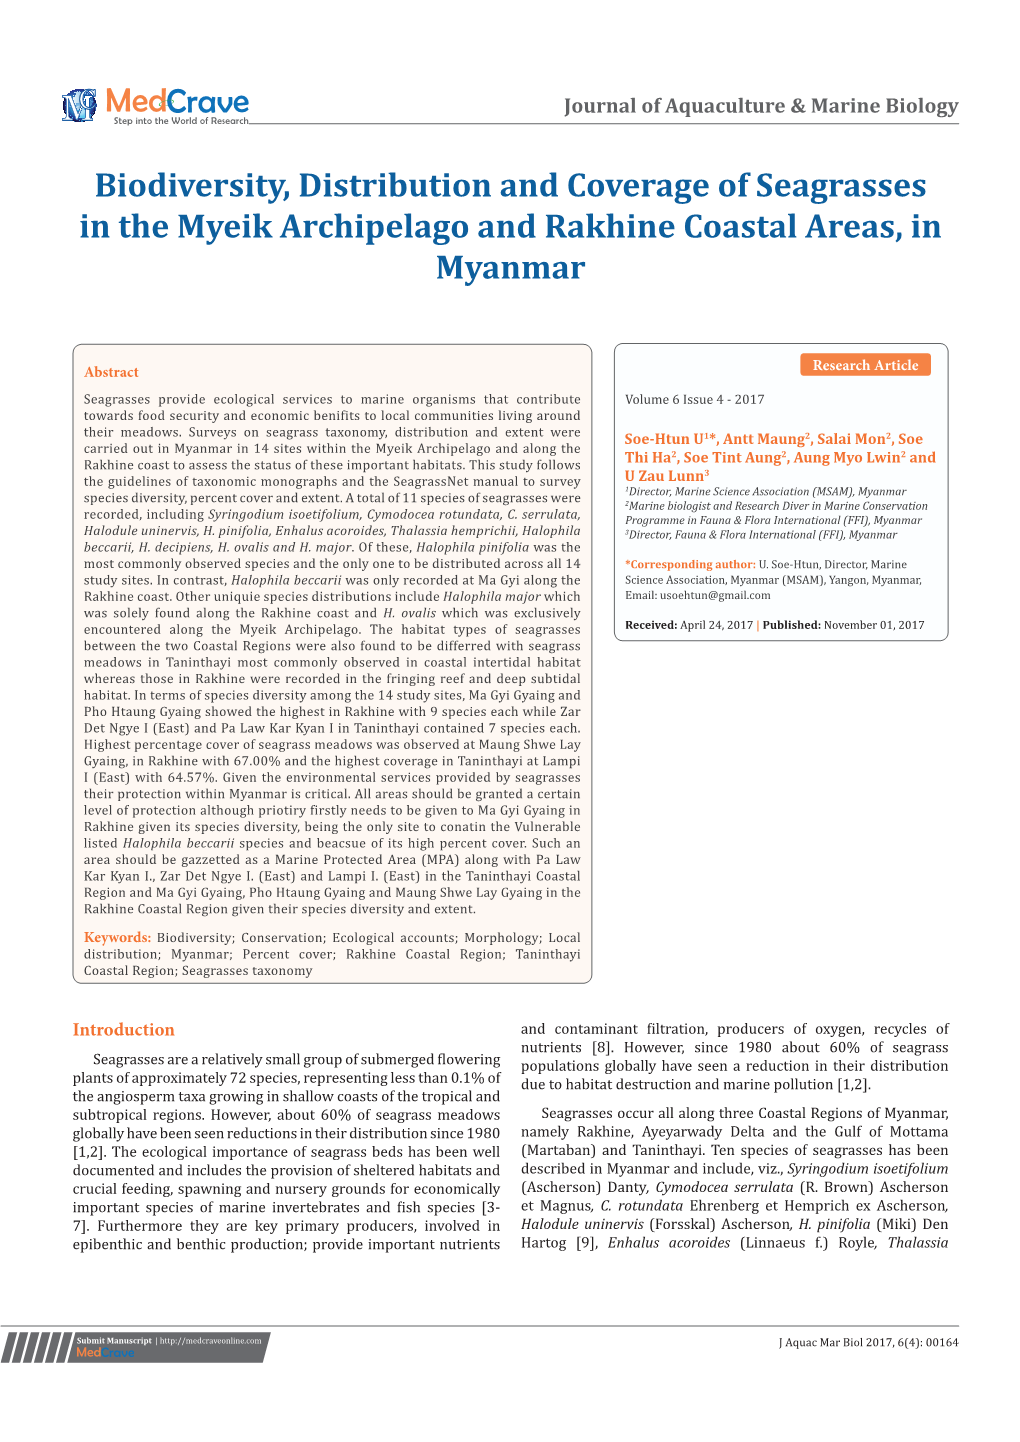 Biodiversity, Distribution and Coverage of Seagrasses in the Myeik Archipelago and Rakhine Coastal Areas, in Myanmar